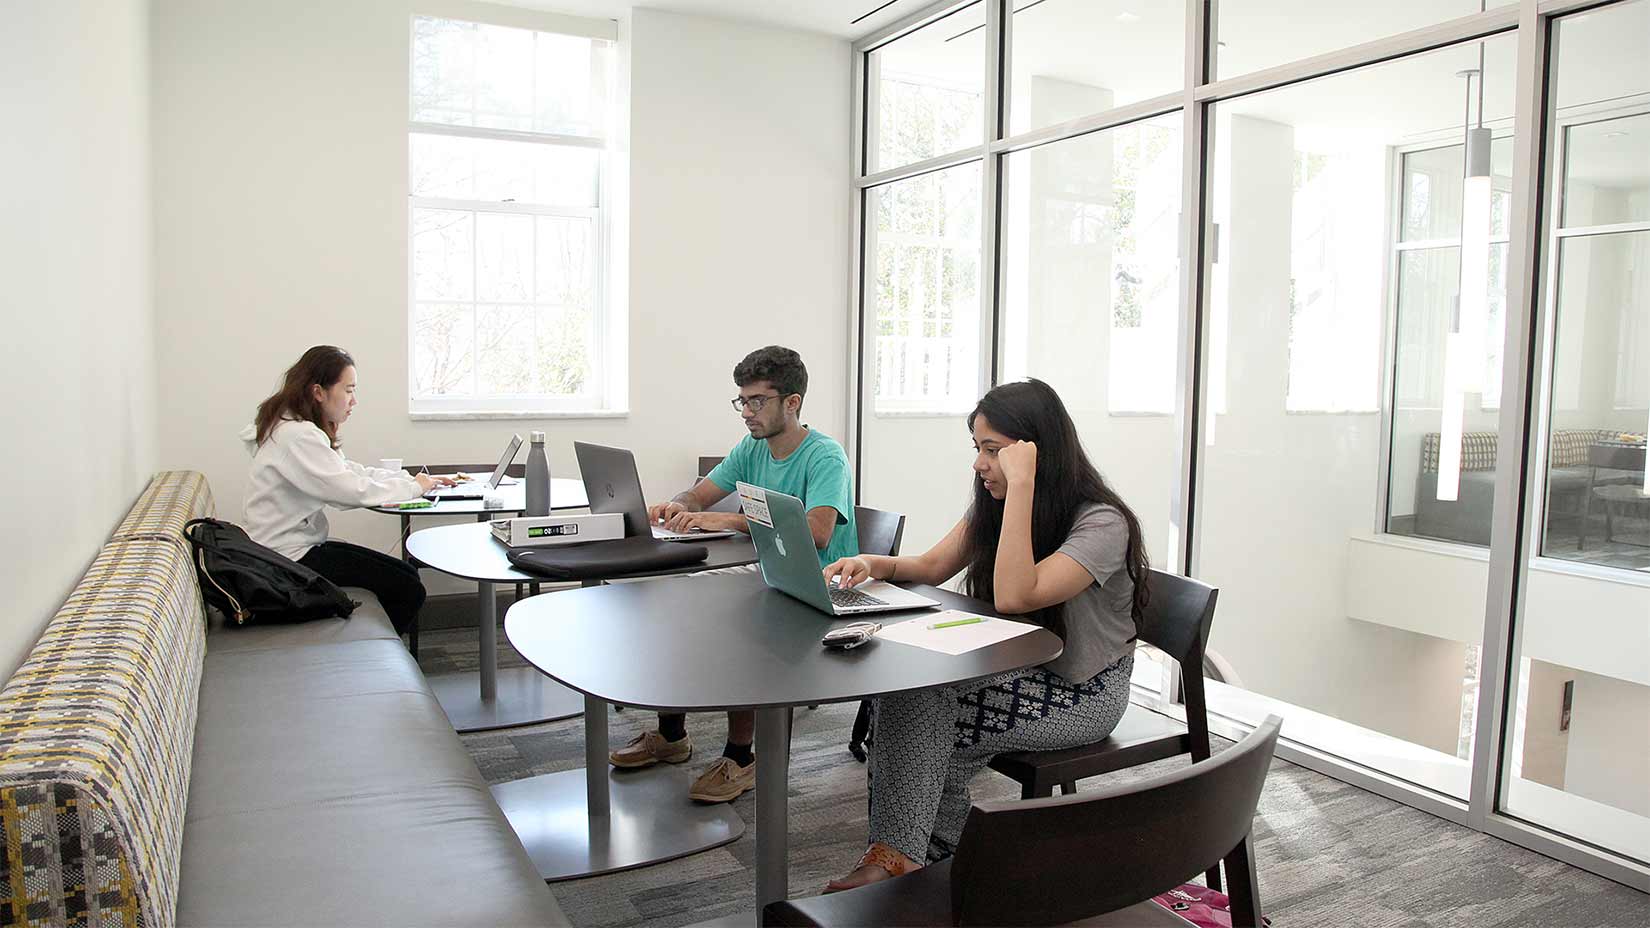 Students use their laptops in one of the Pierce Hall study rooms.